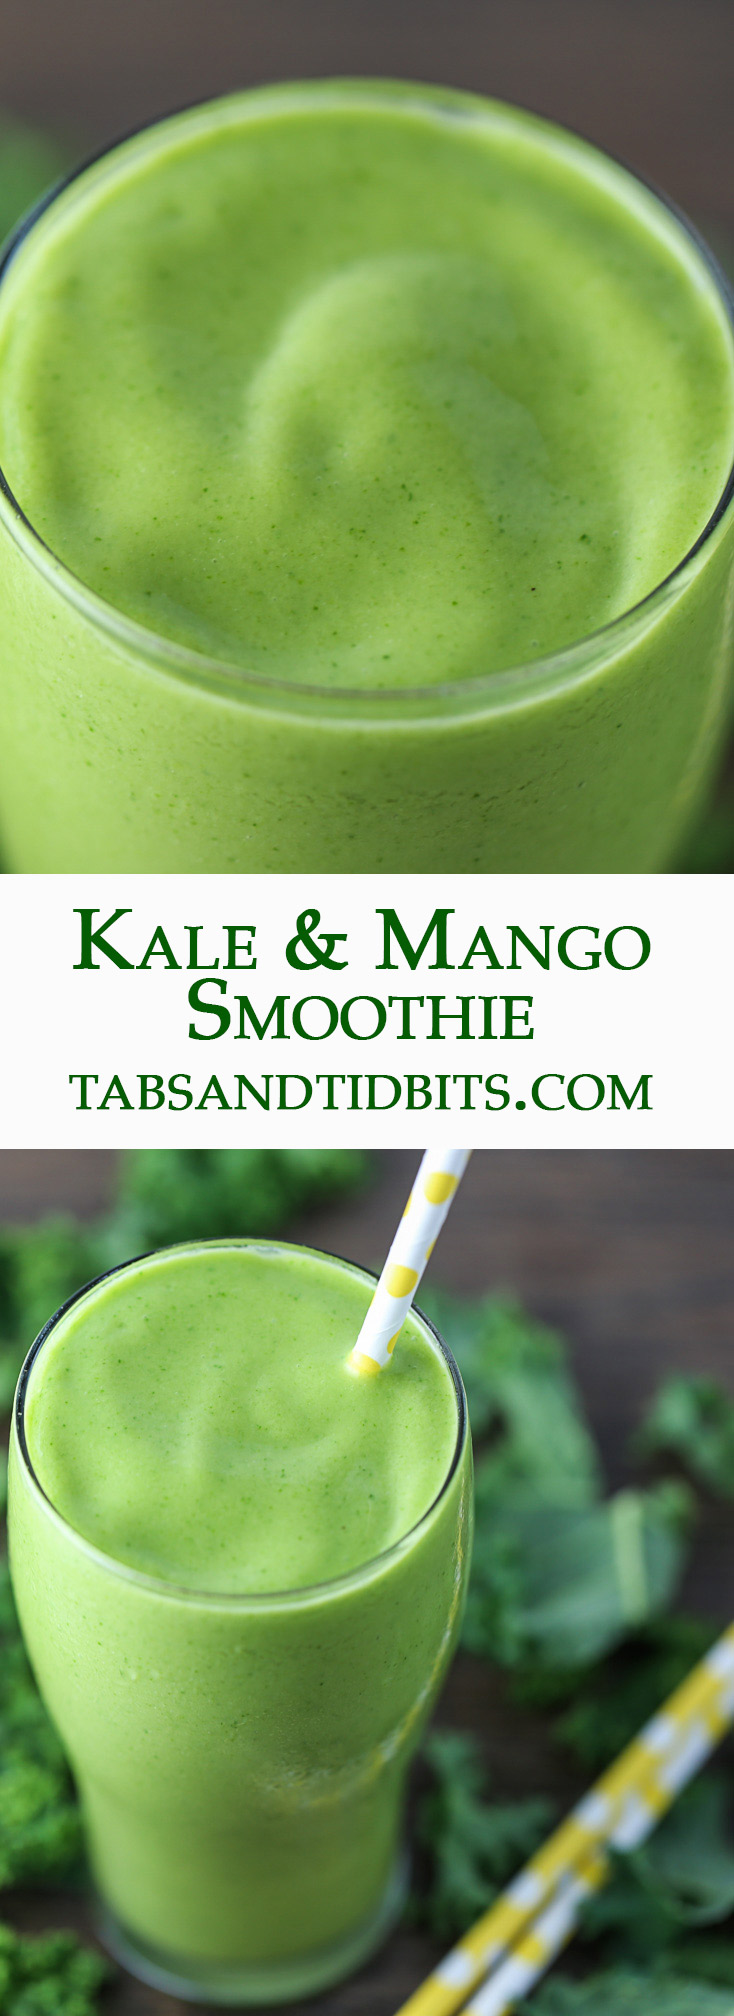 Kale, mango, coconut, and a touch of ginger blended into one delicious and healthy smoothie!